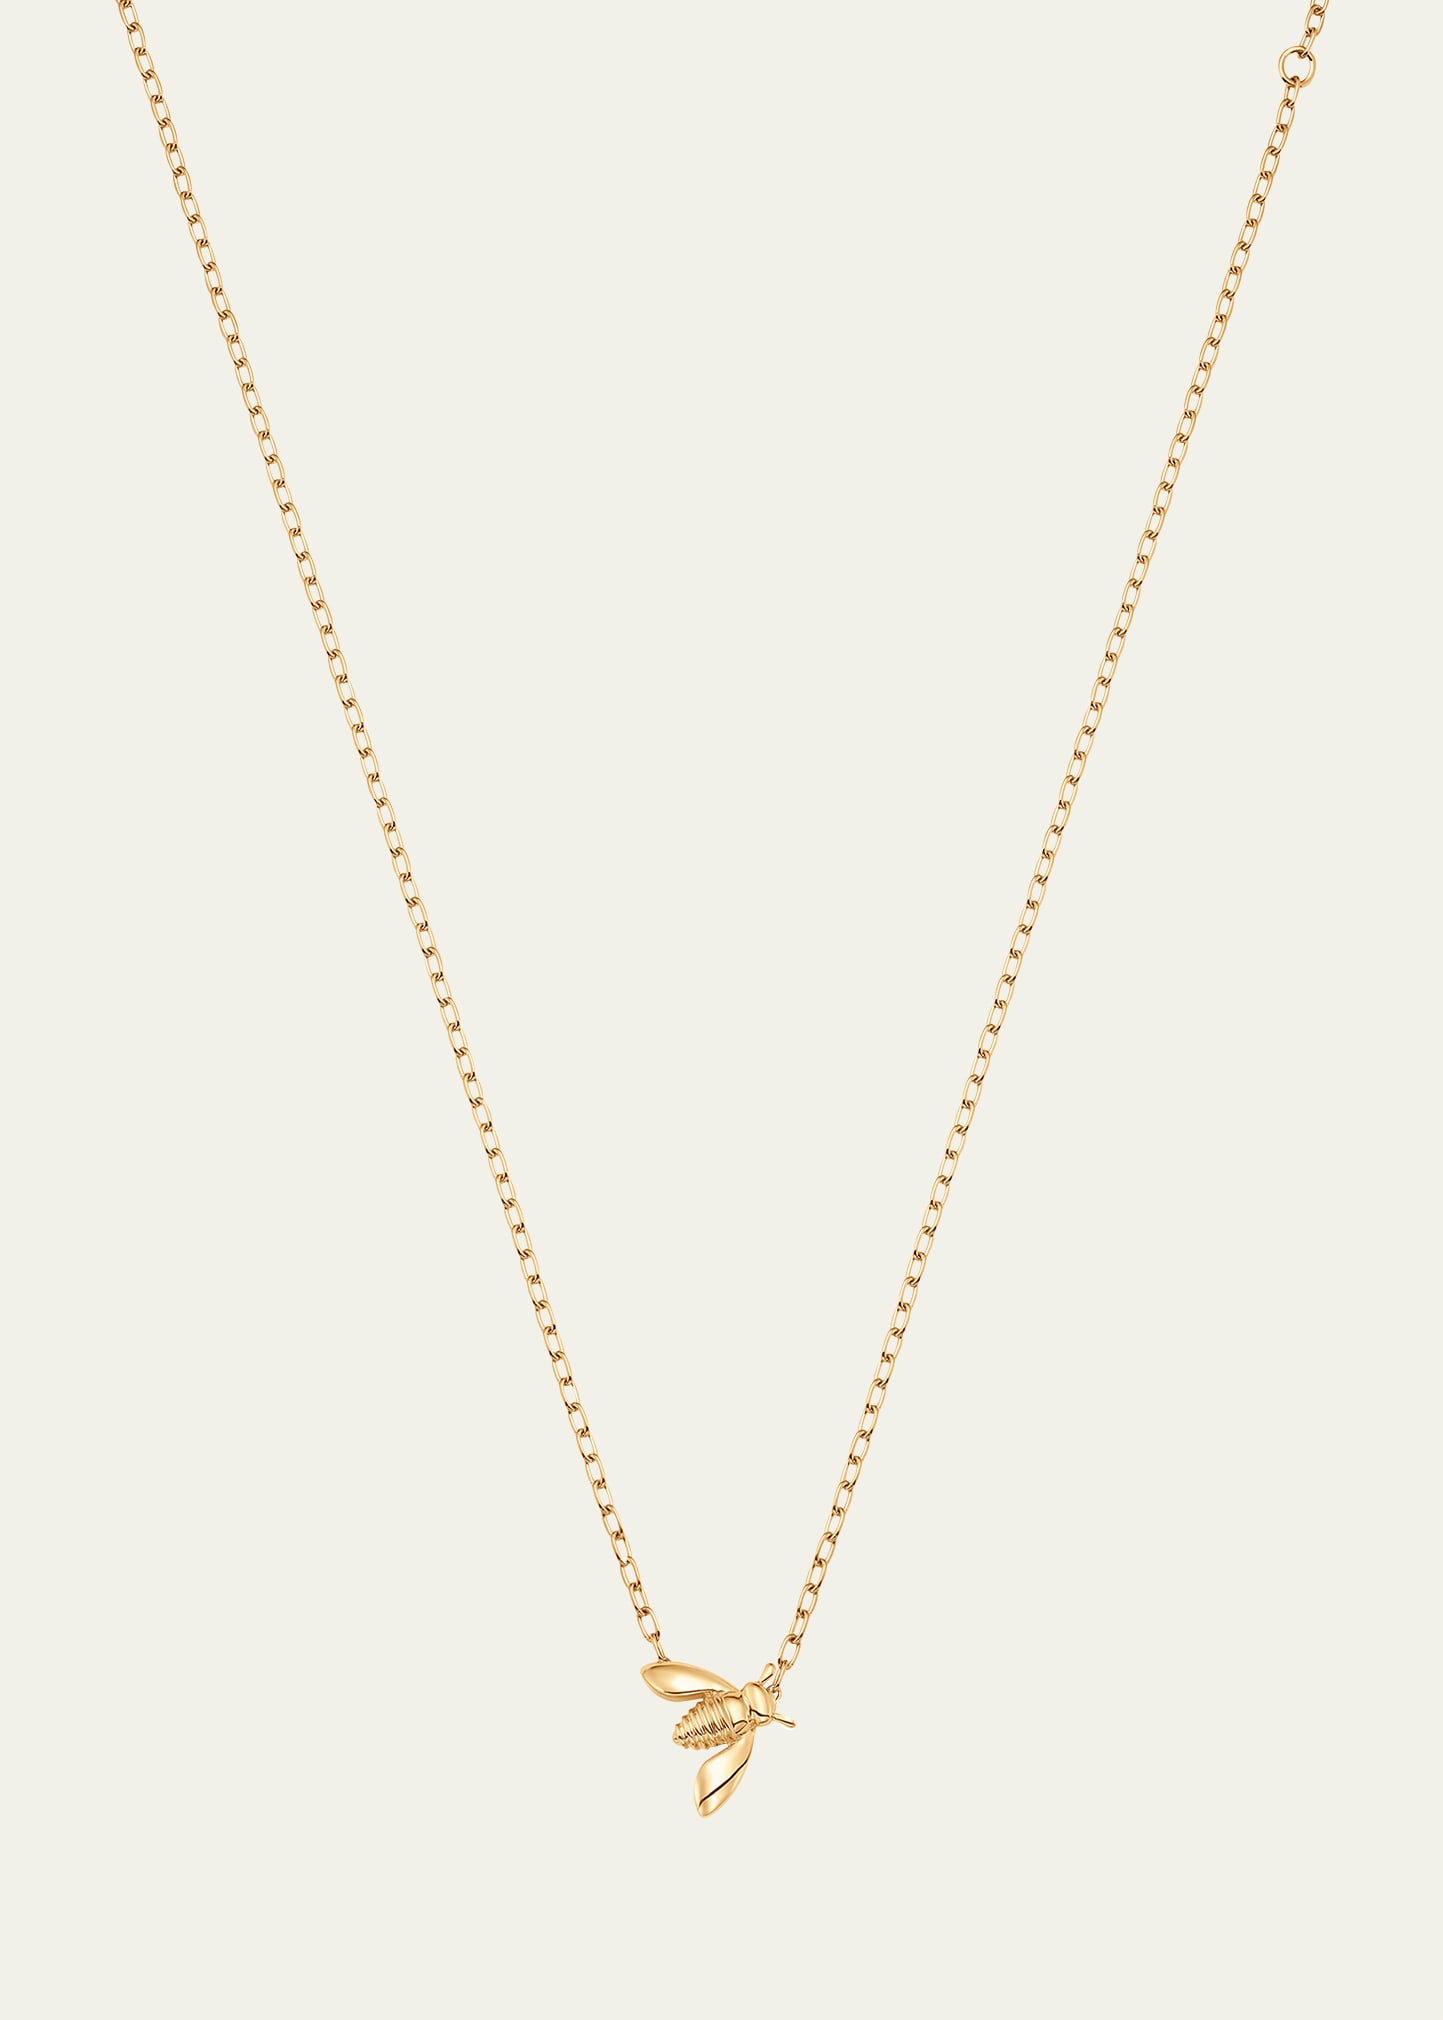 18K Yellow Gold Queen Bee Extra Petite Pendant Necklace, 16"L